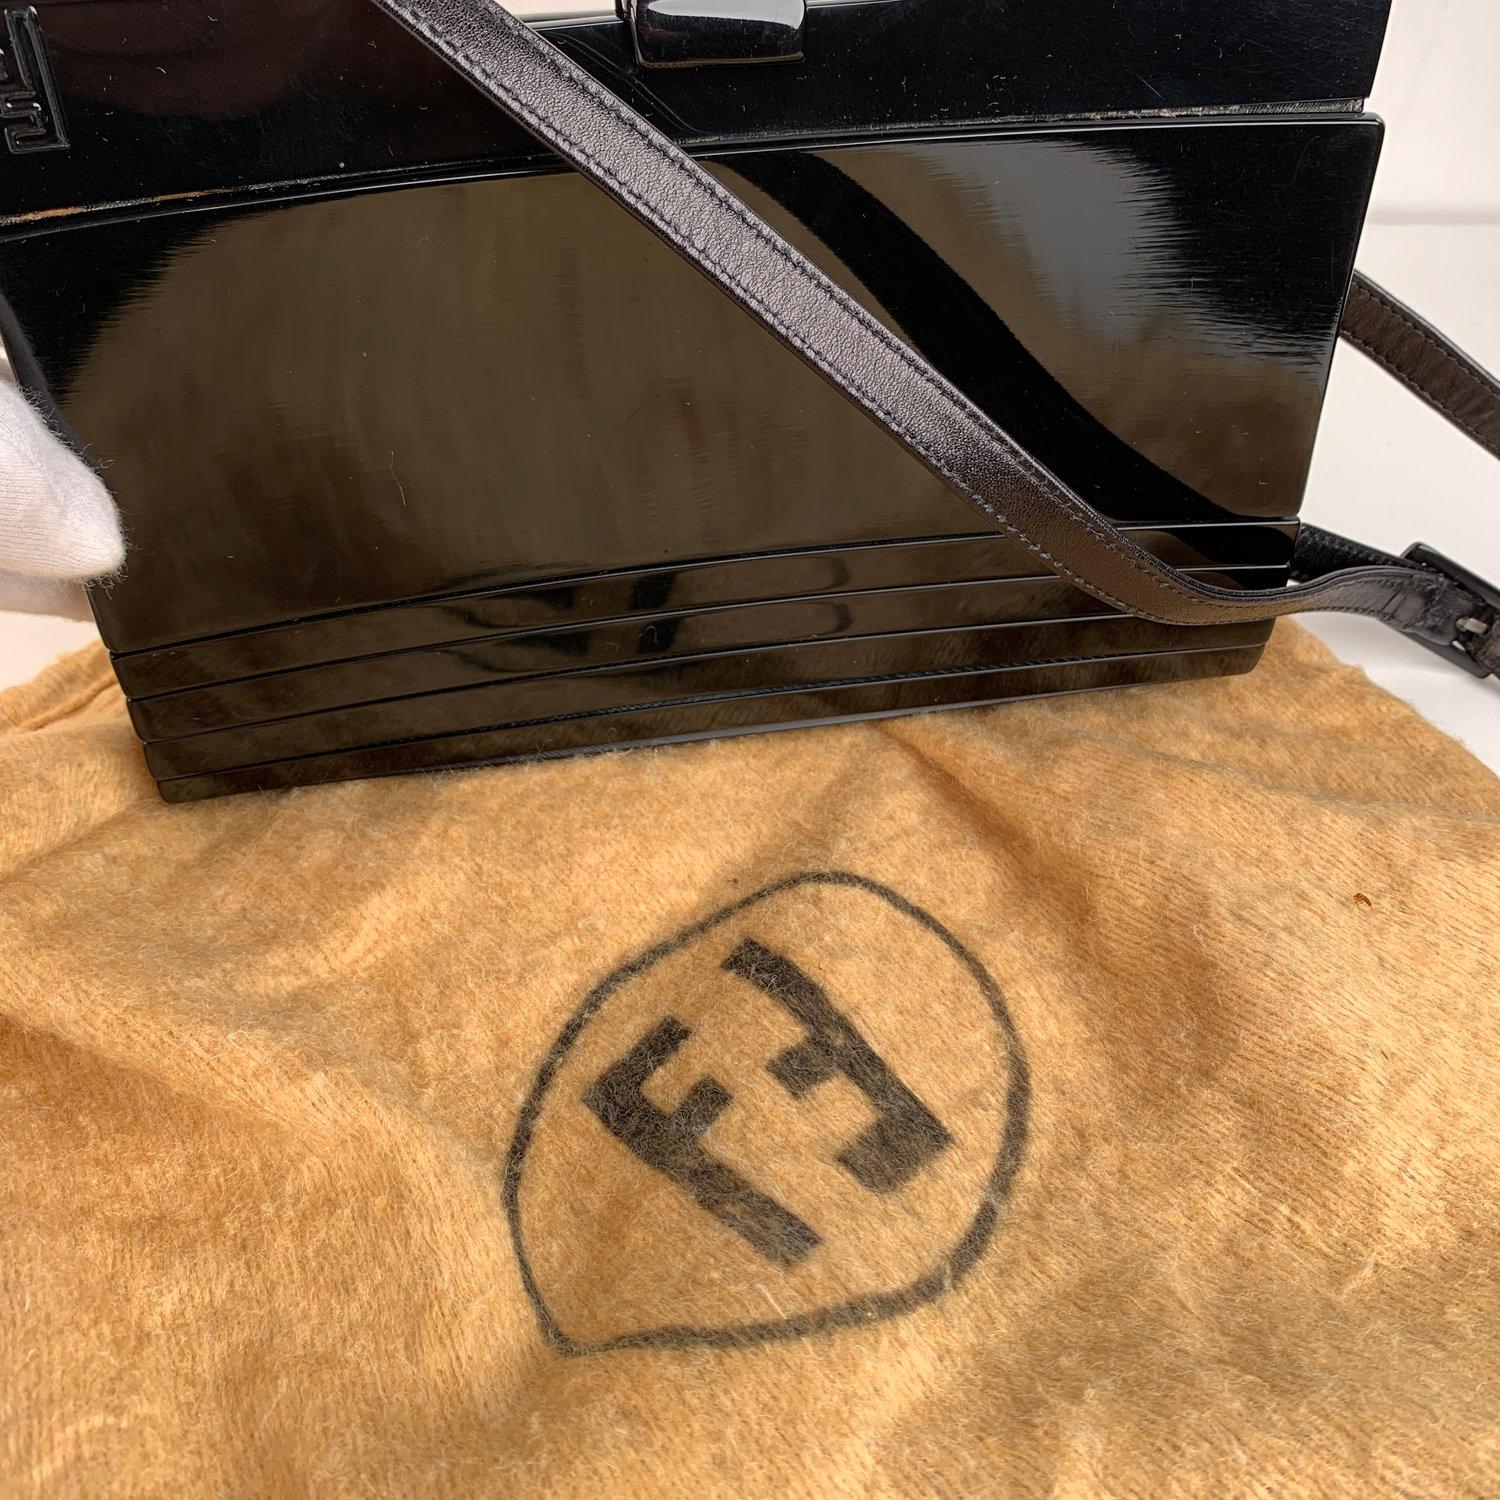 Beautiful and rare vintage Fendi convertible bag from the 60s/70s. The bag is crafted in black lucite and leather. Clasp closure on top. FF - FENDI logo on the front. Removable leather shoulder strap (can be use as a shoulder bag or as a clutch